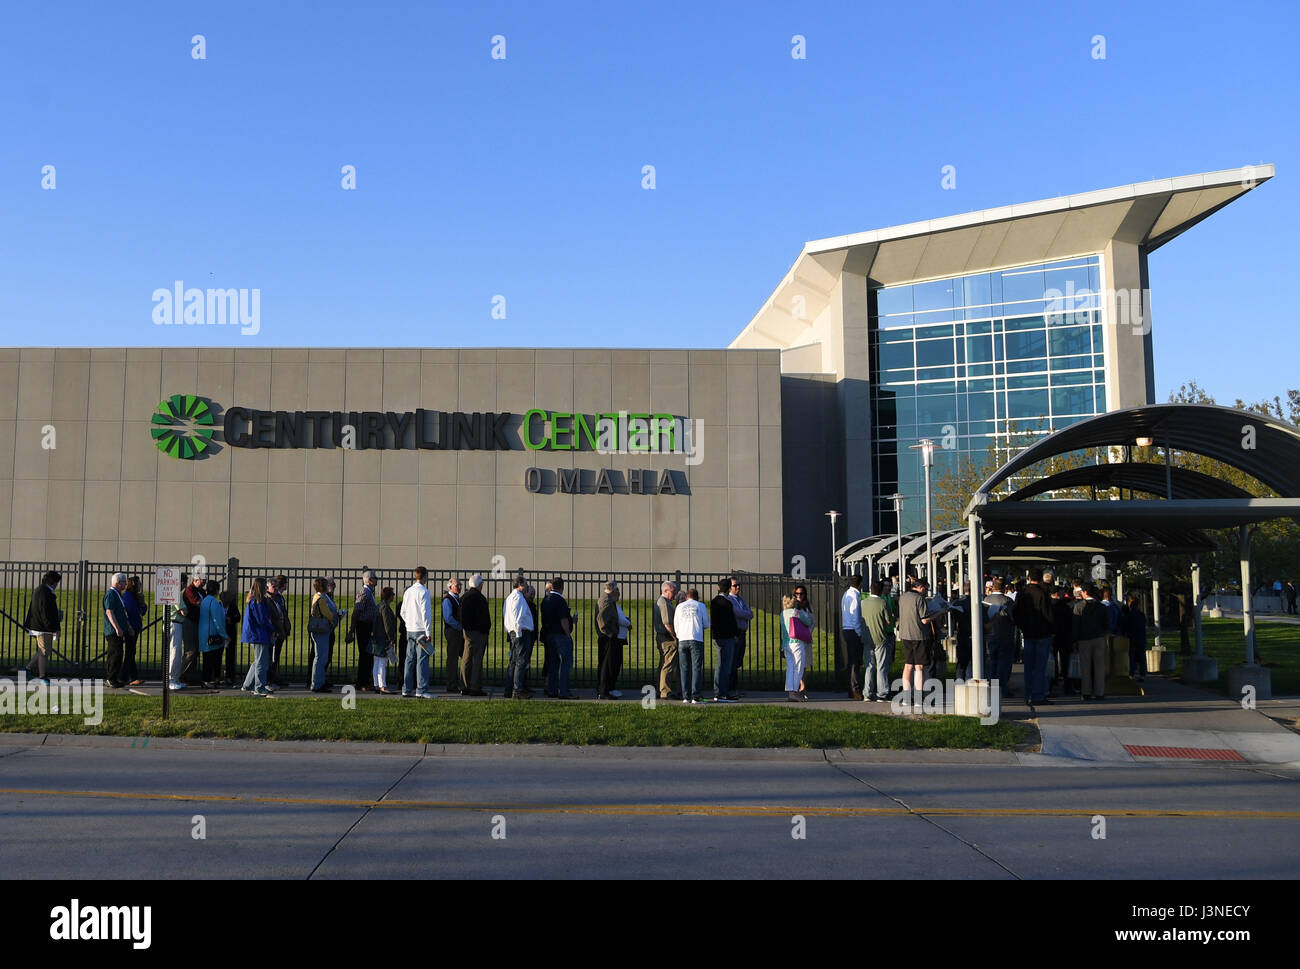 Omaha, USA. 6th May, 2017. Shareholders line to enter CenturyLink Center for Warren Buffett's Berkshire Hathaway Annual Meeting in Omaha, Nebraska, the United States, May 6, 2017. The event attracts more than 40,000 shareholders from around the world as well as a wide variety of media outlets to Omaha every year. Credit: Yin Bogu/Xinhua/Alamy Live News Stock Photo